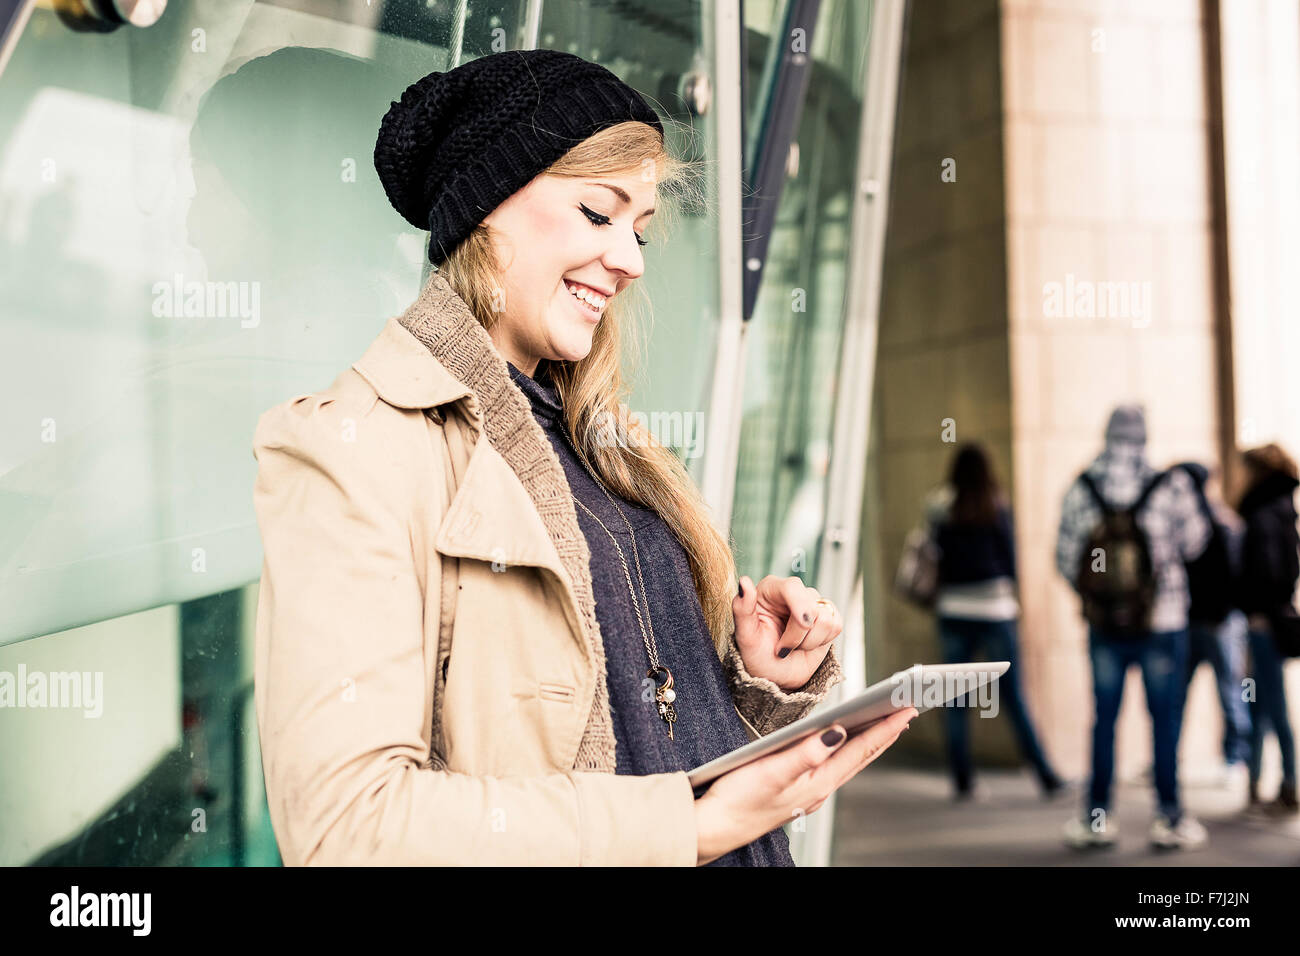 Blonde woman using a digital tablet Stock Photo